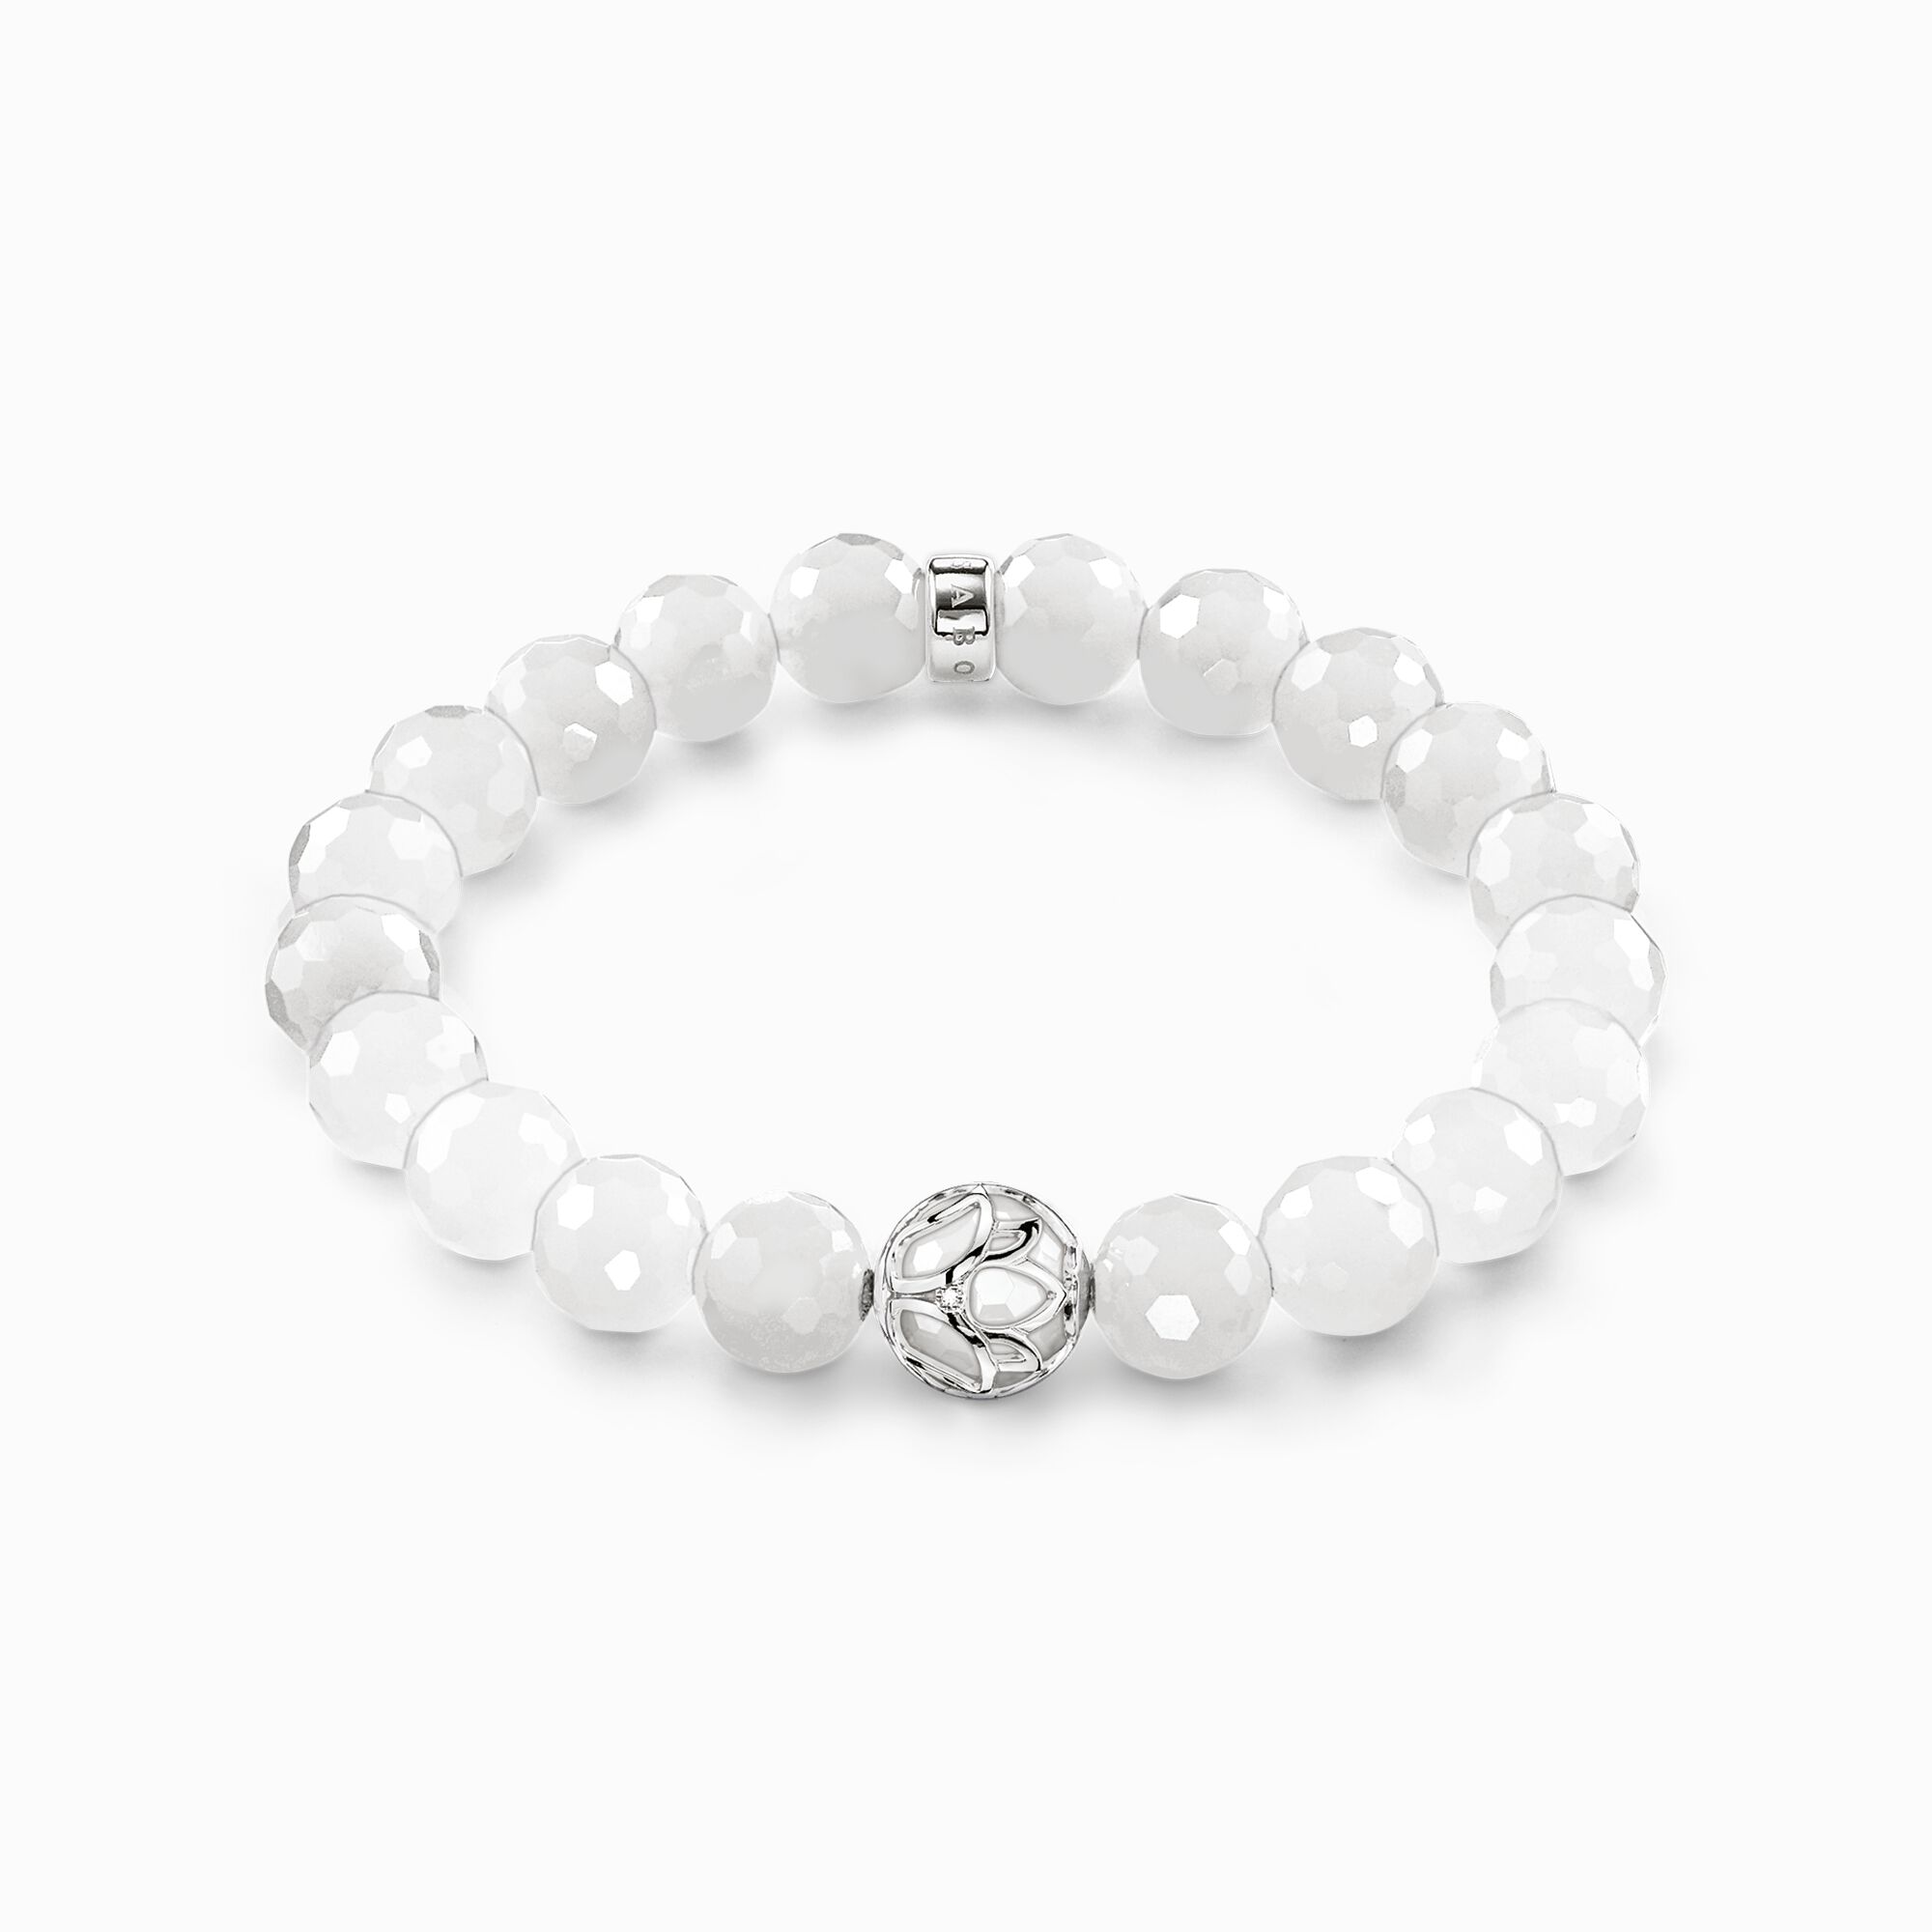 Bracelet white lotos blossom from the  collection in the THOMAS SABO online store